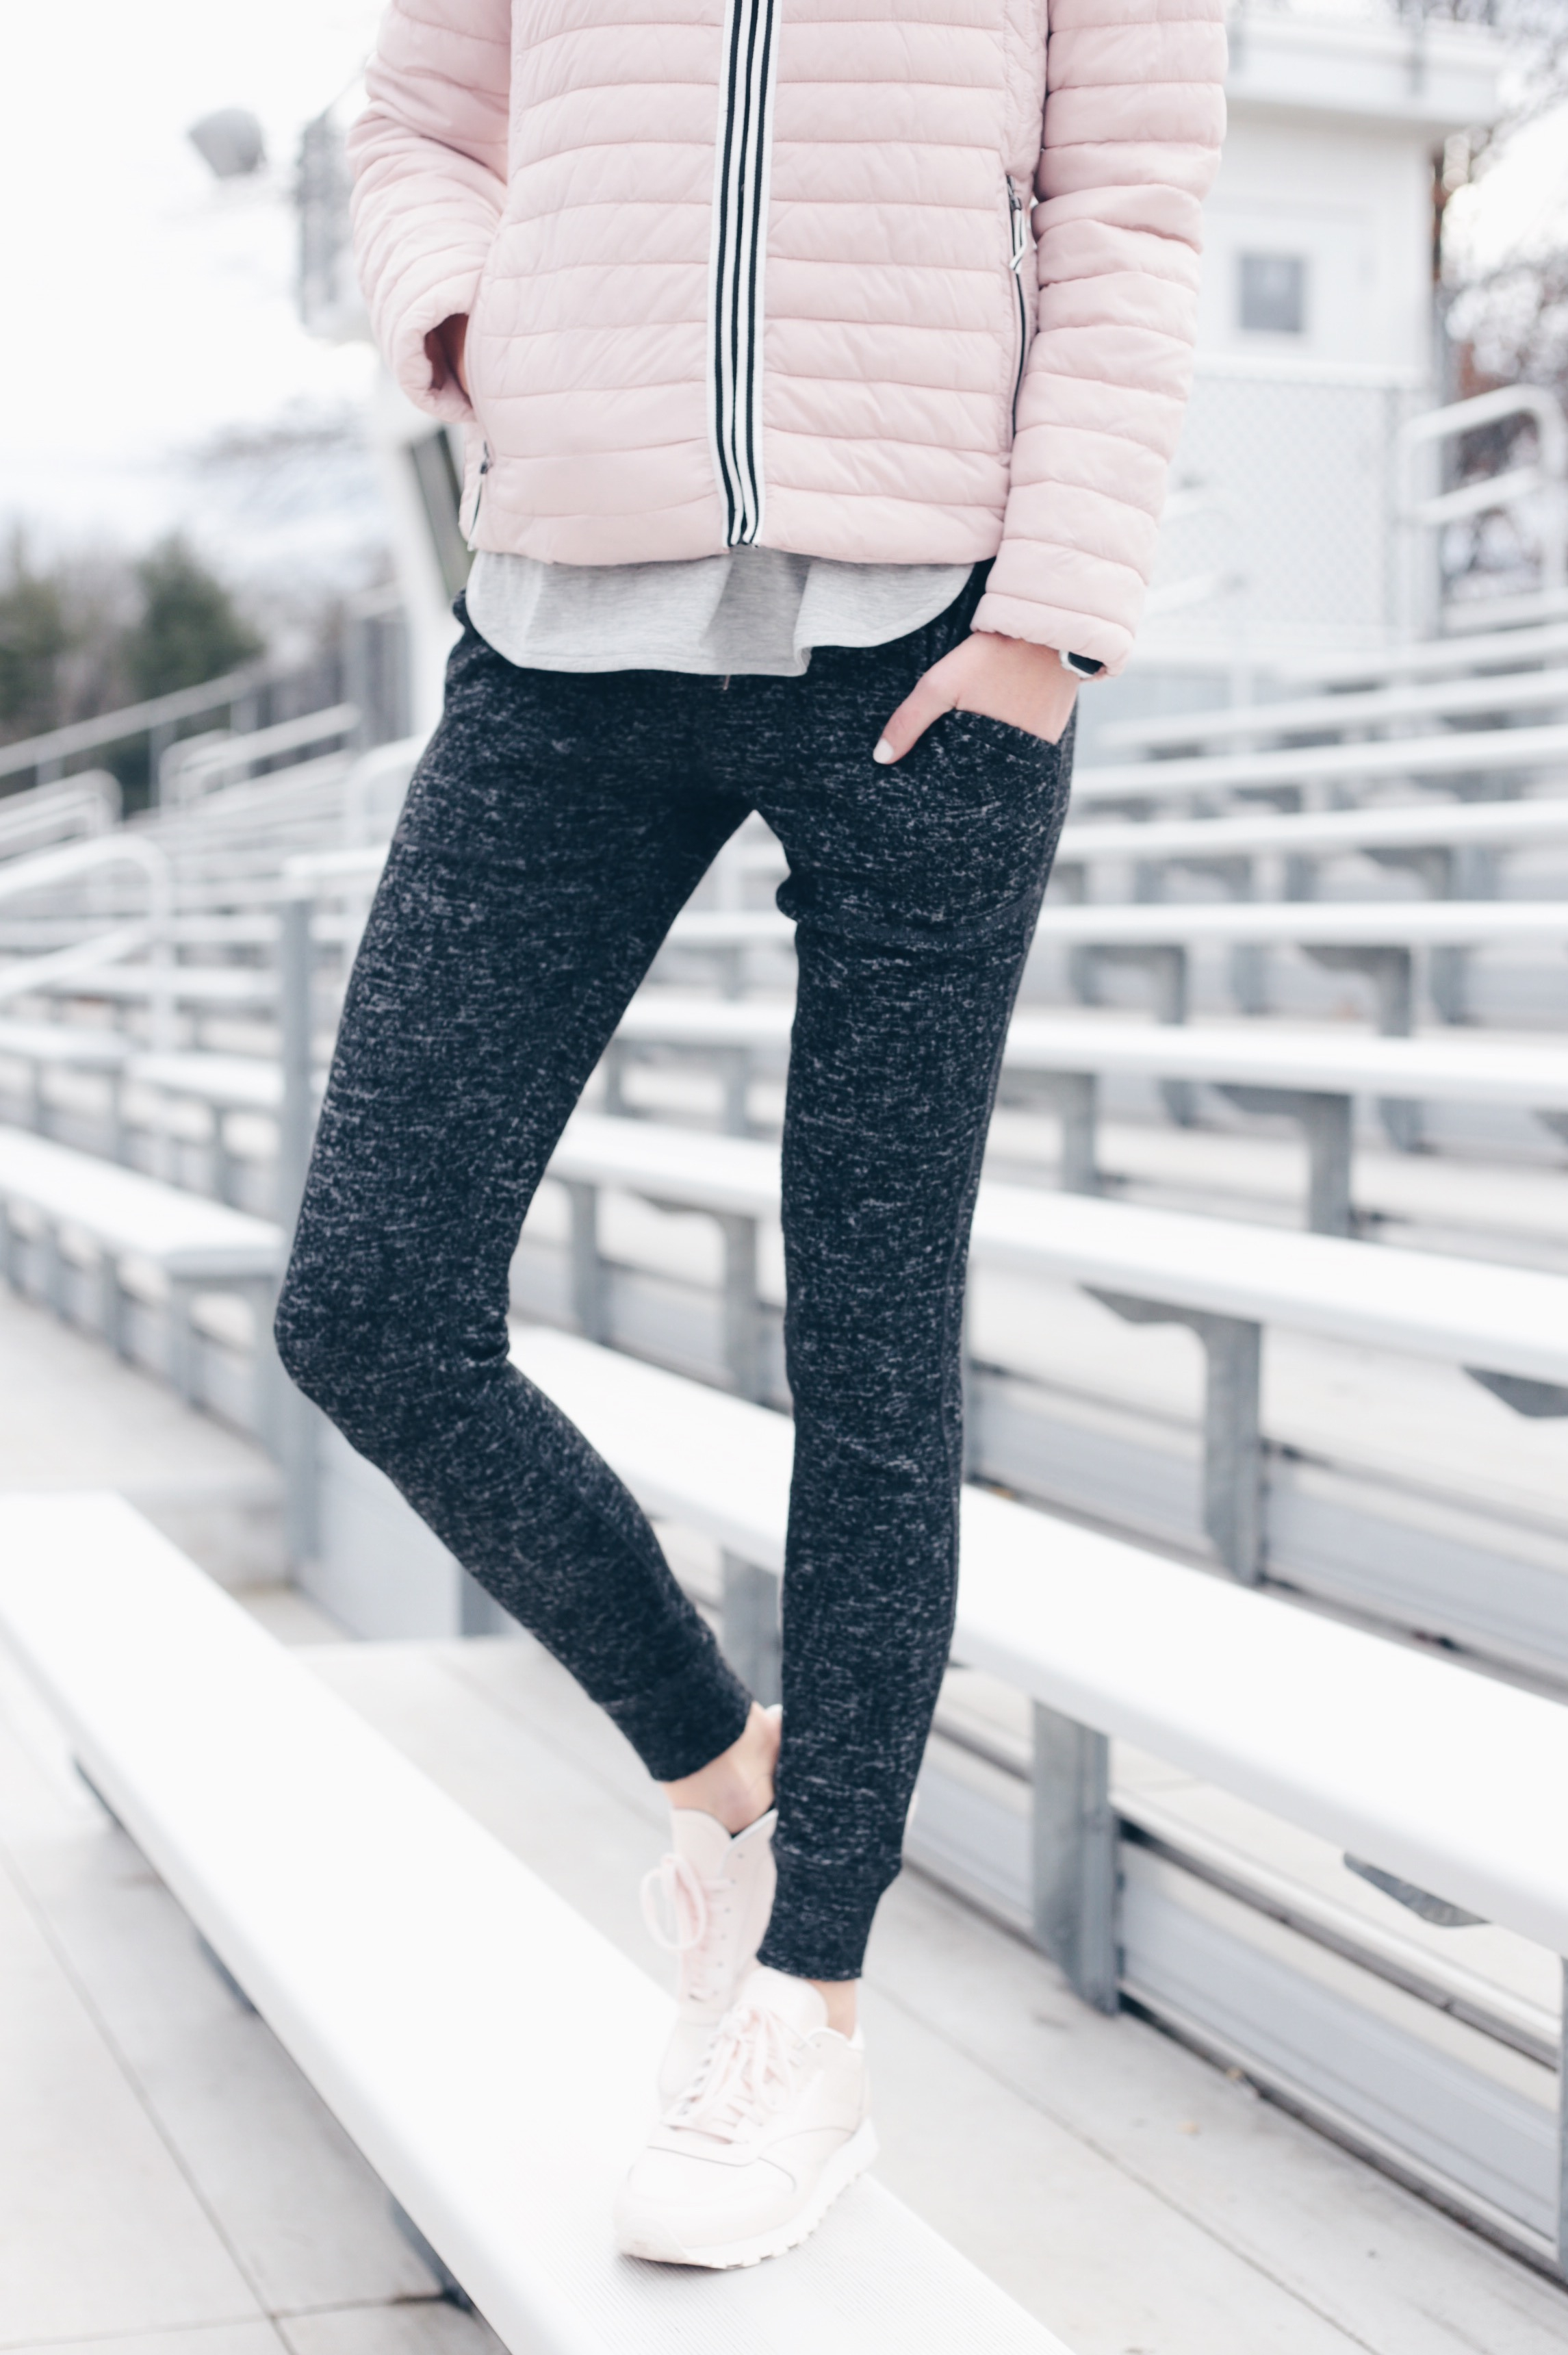 Winter Athleisure Outfit Ideas with Joggers